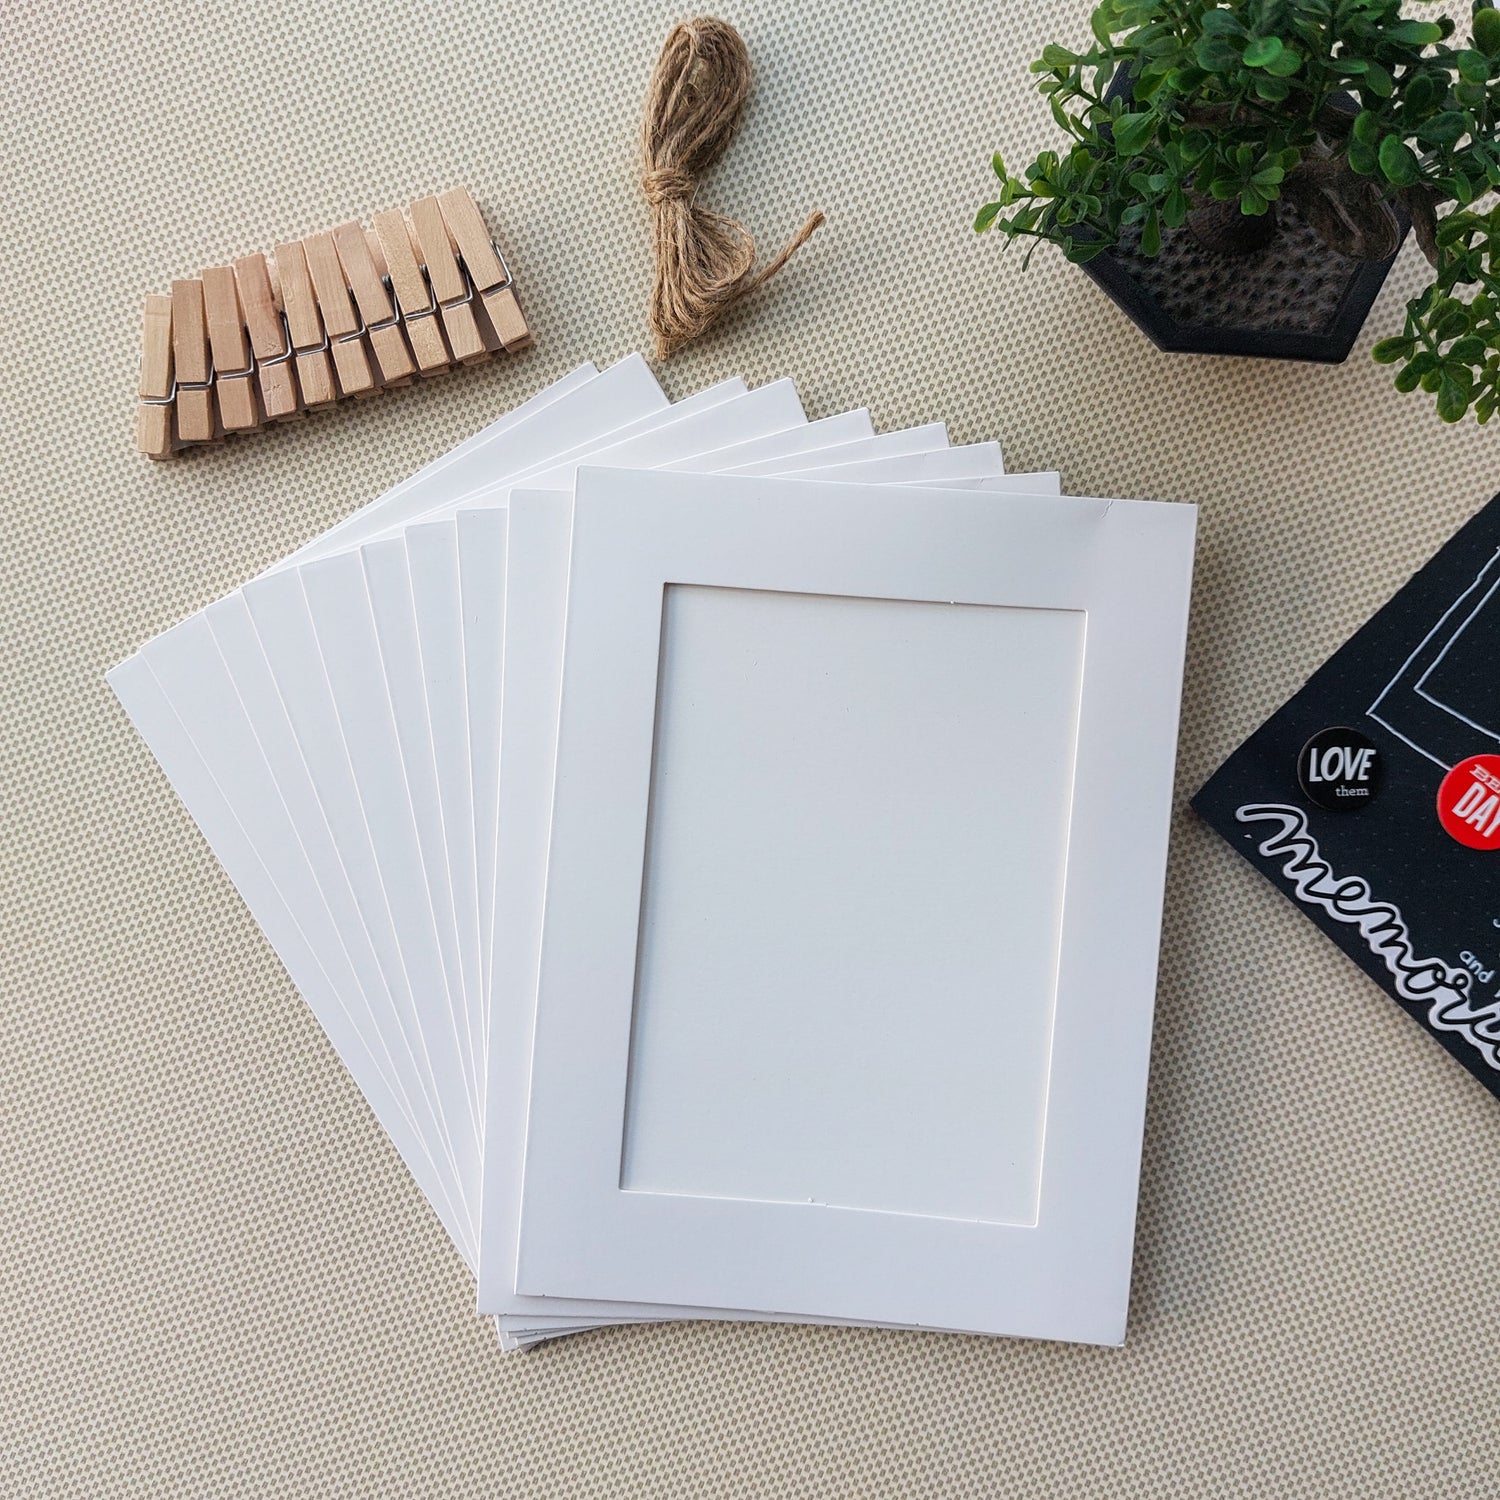 Hanging Photo Frame Kit with String and Clips